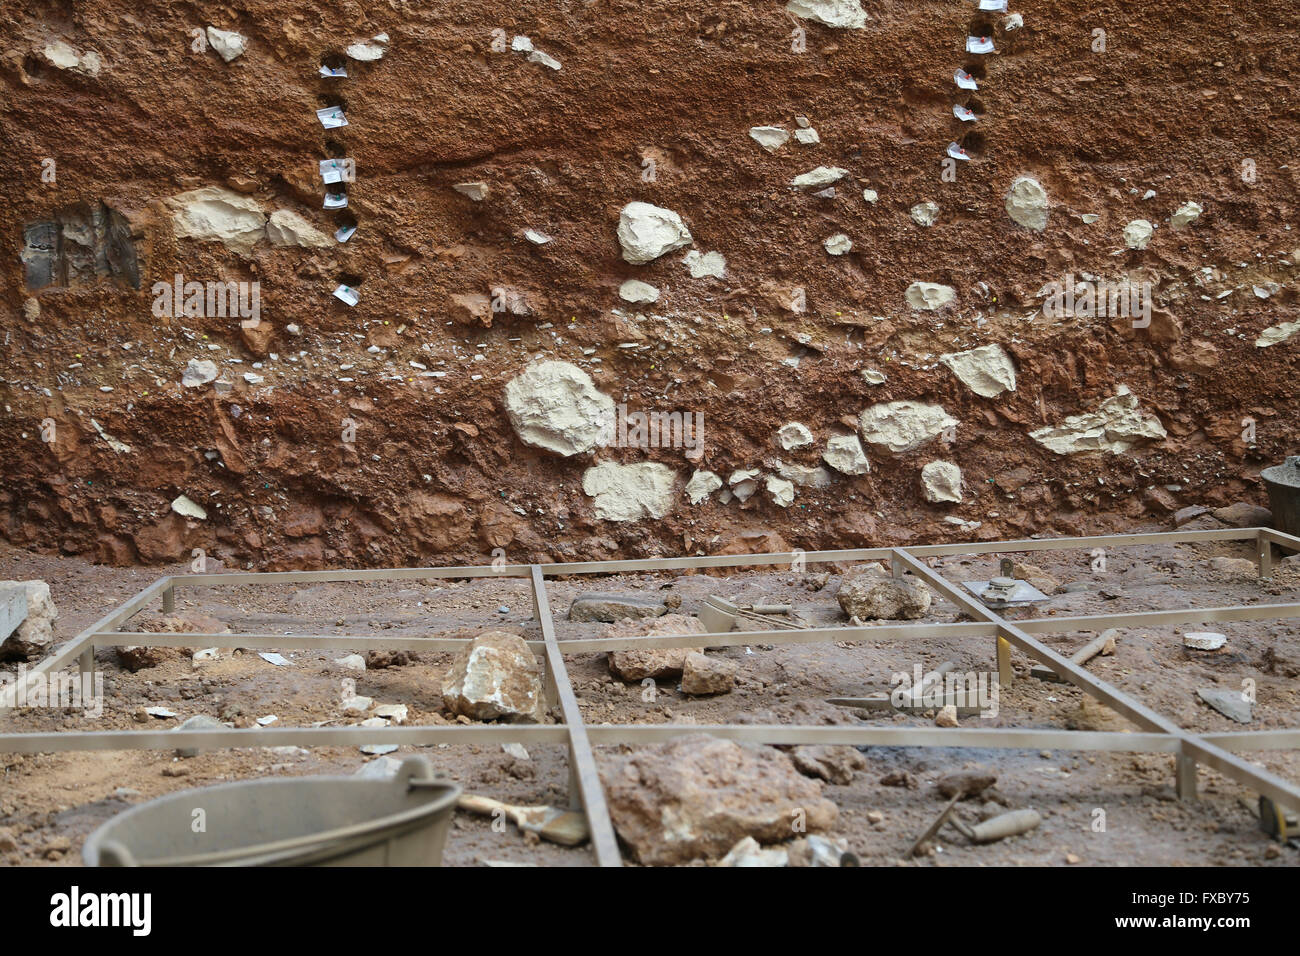 Archaeological excavation. Study materials remains. Stratigraphy. Atapuerca. Burgos. Spain. Stock Photo